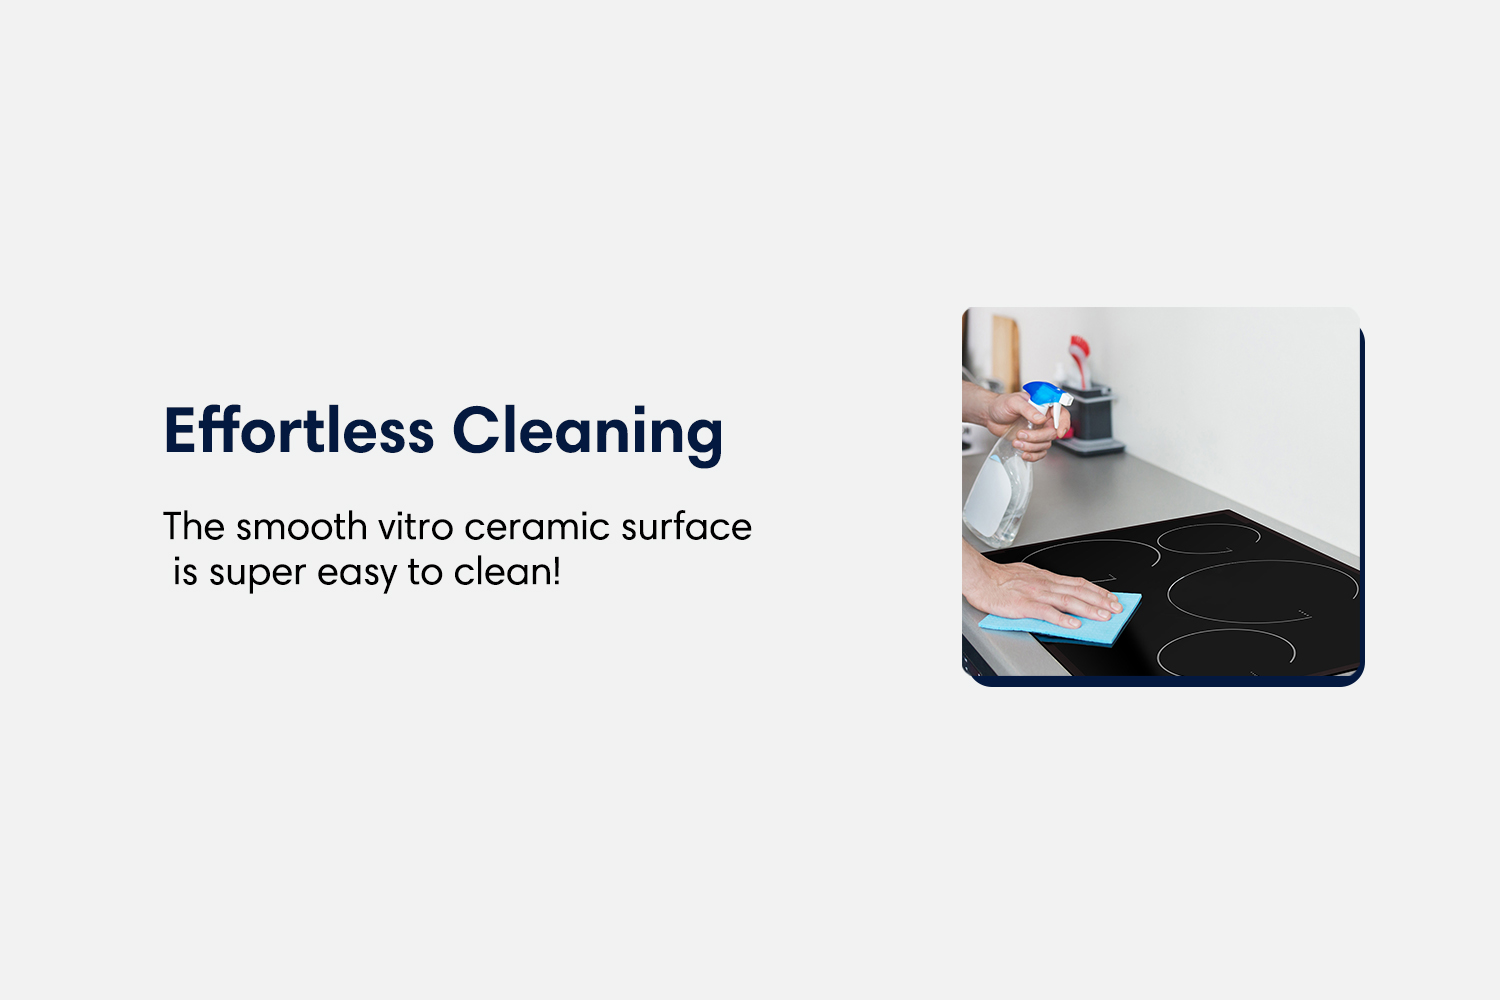 Effortless cleaning the smooth vitro ceramic surface is super easy to clean!